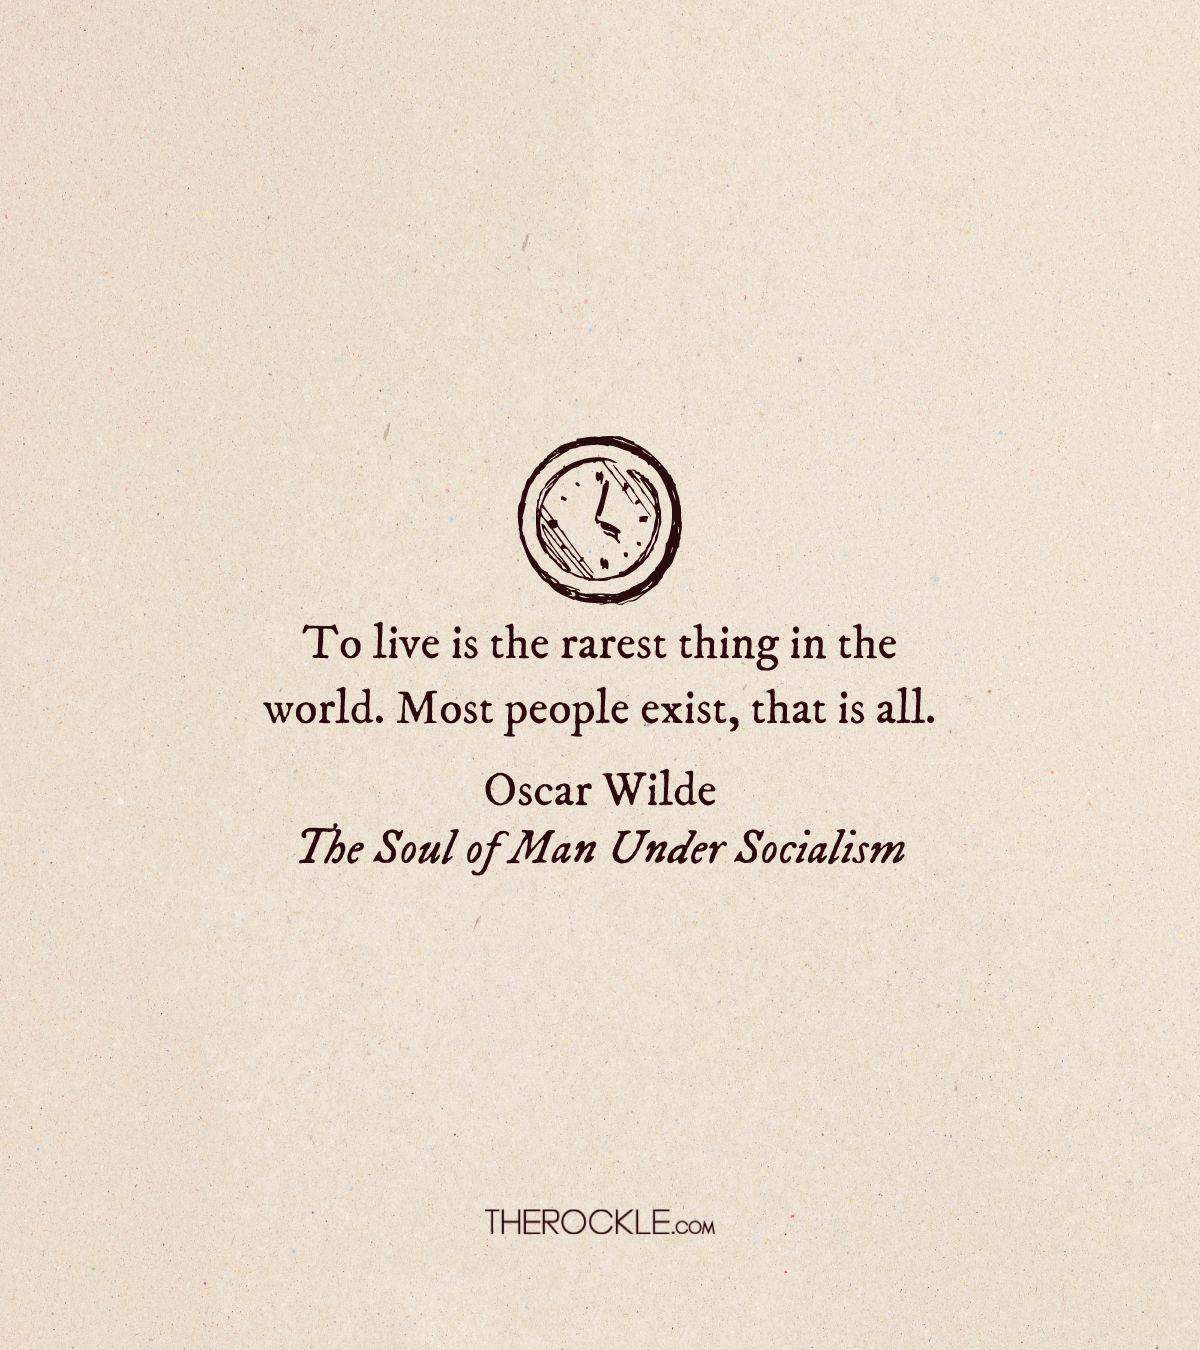 Oscar Wilde quote about life